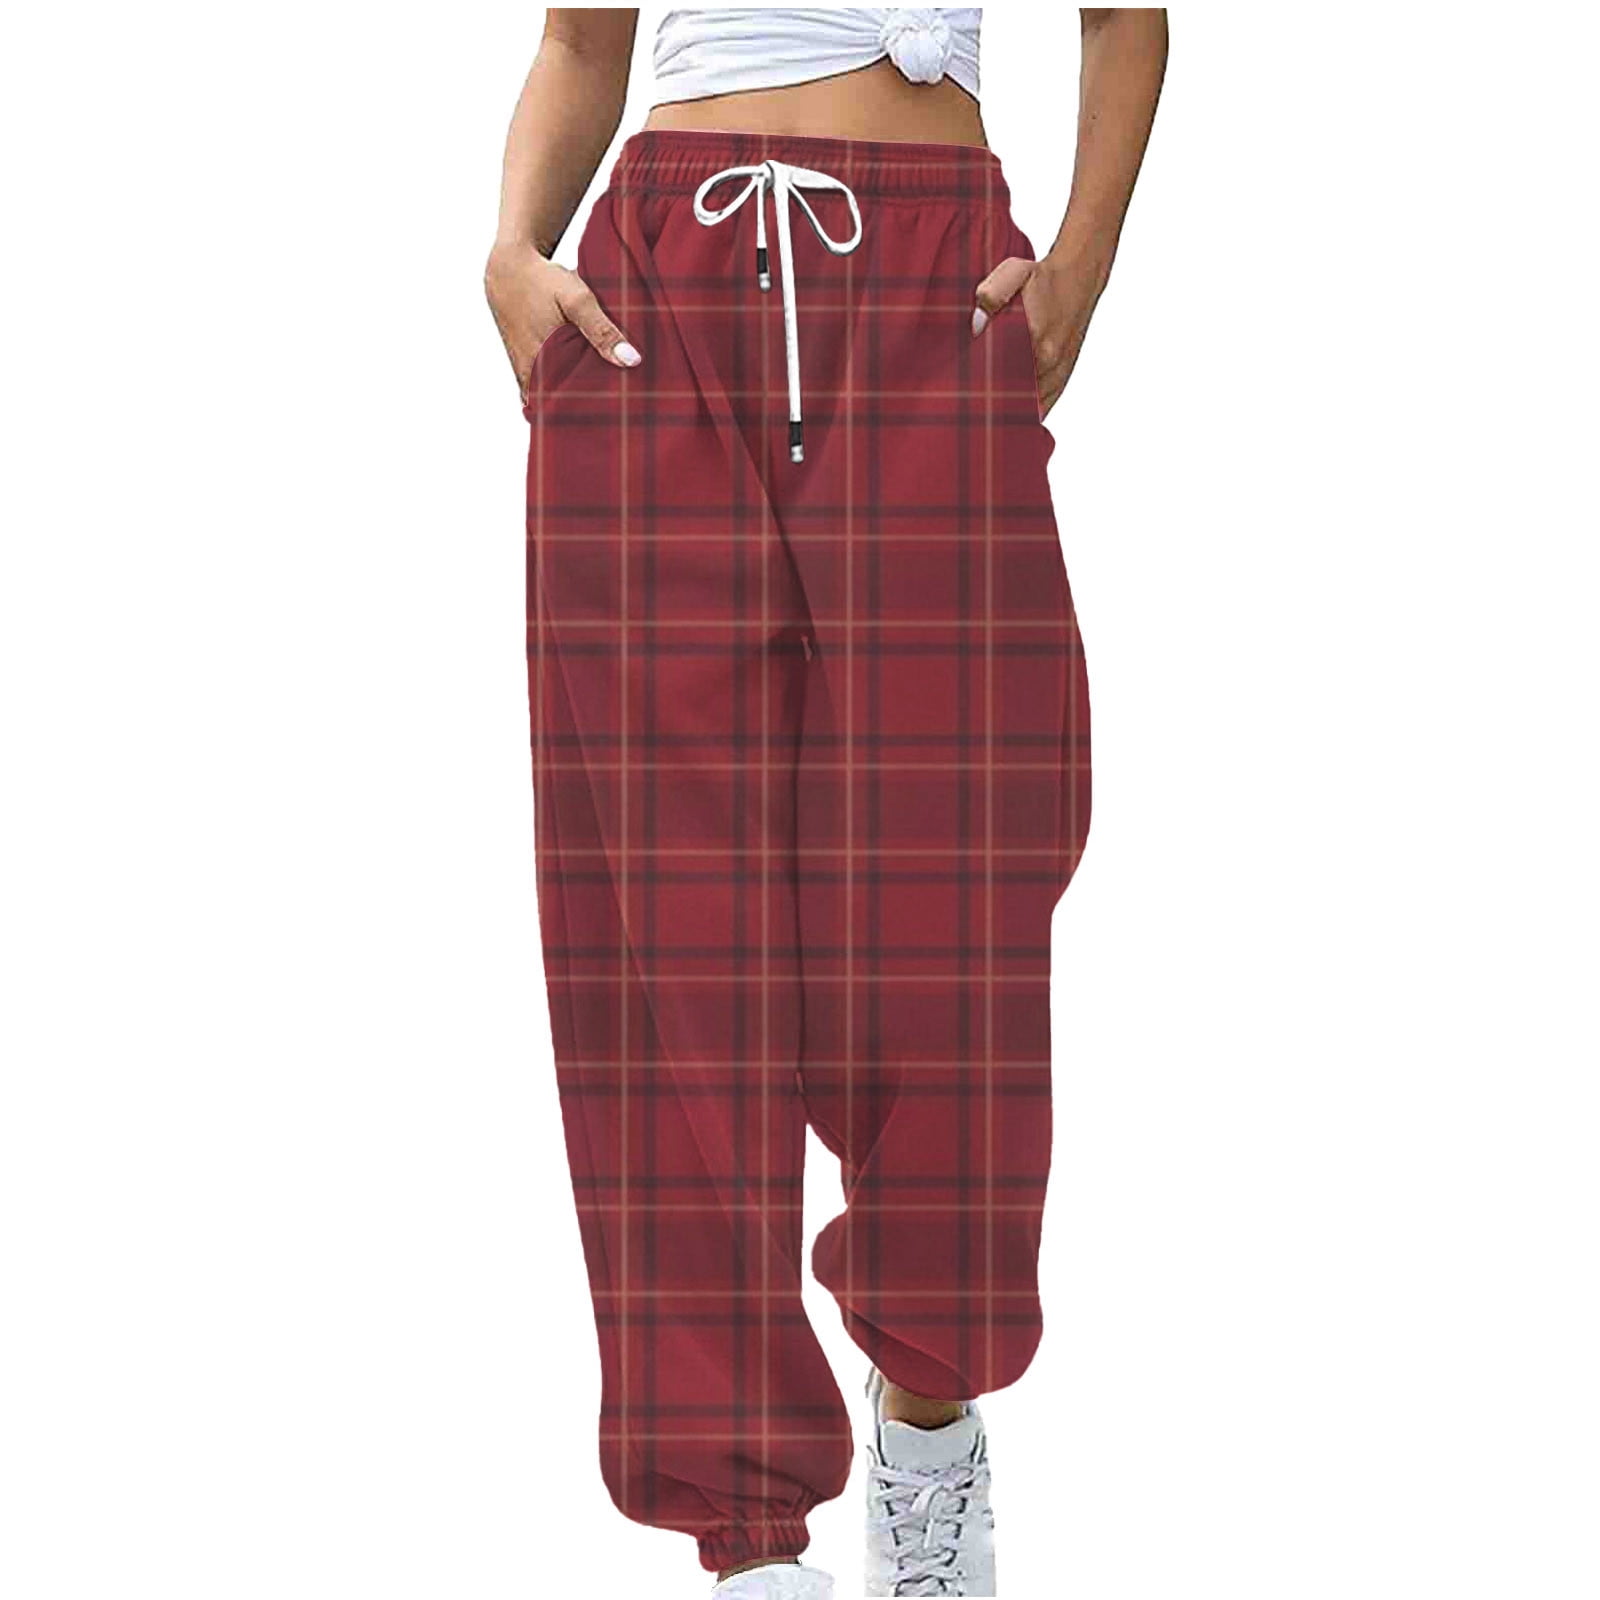 Frostluinai Sweatpants For Women With Pockets Sweatpants For Women With  Pockets Baggy Solid Elastic Waist Trousers Long Straight Pants 